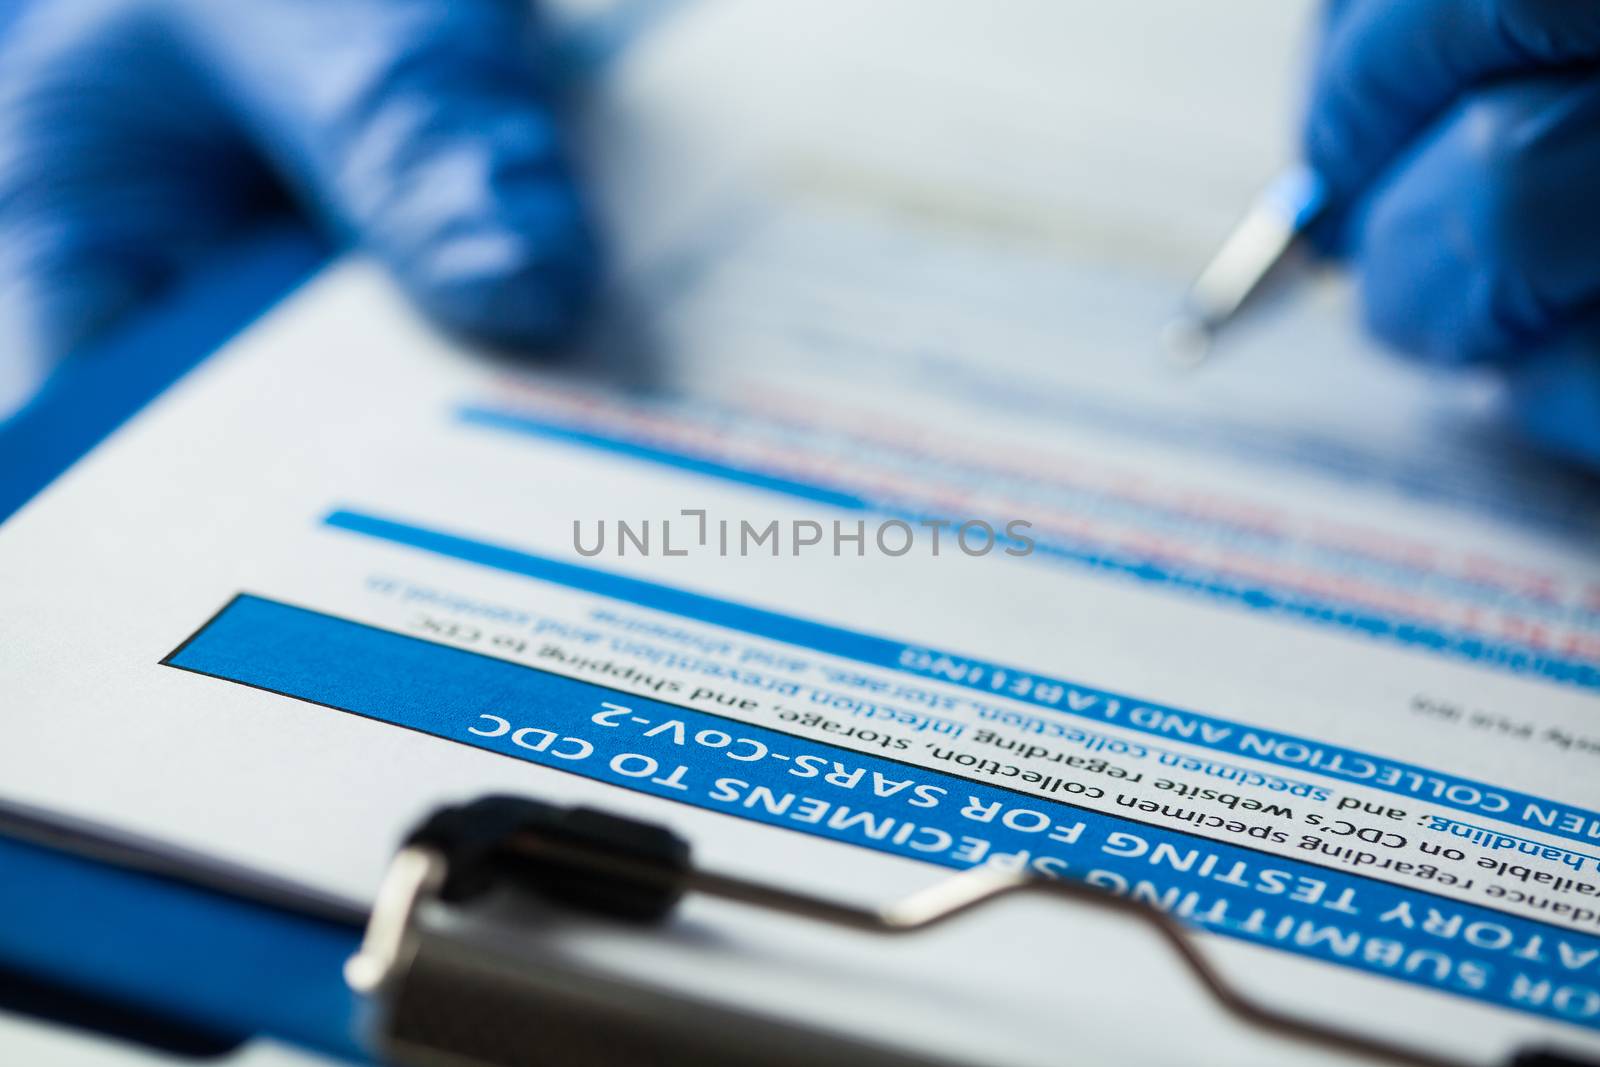 Laboratory technician checking CDC specimen submitting form by Plyushkin